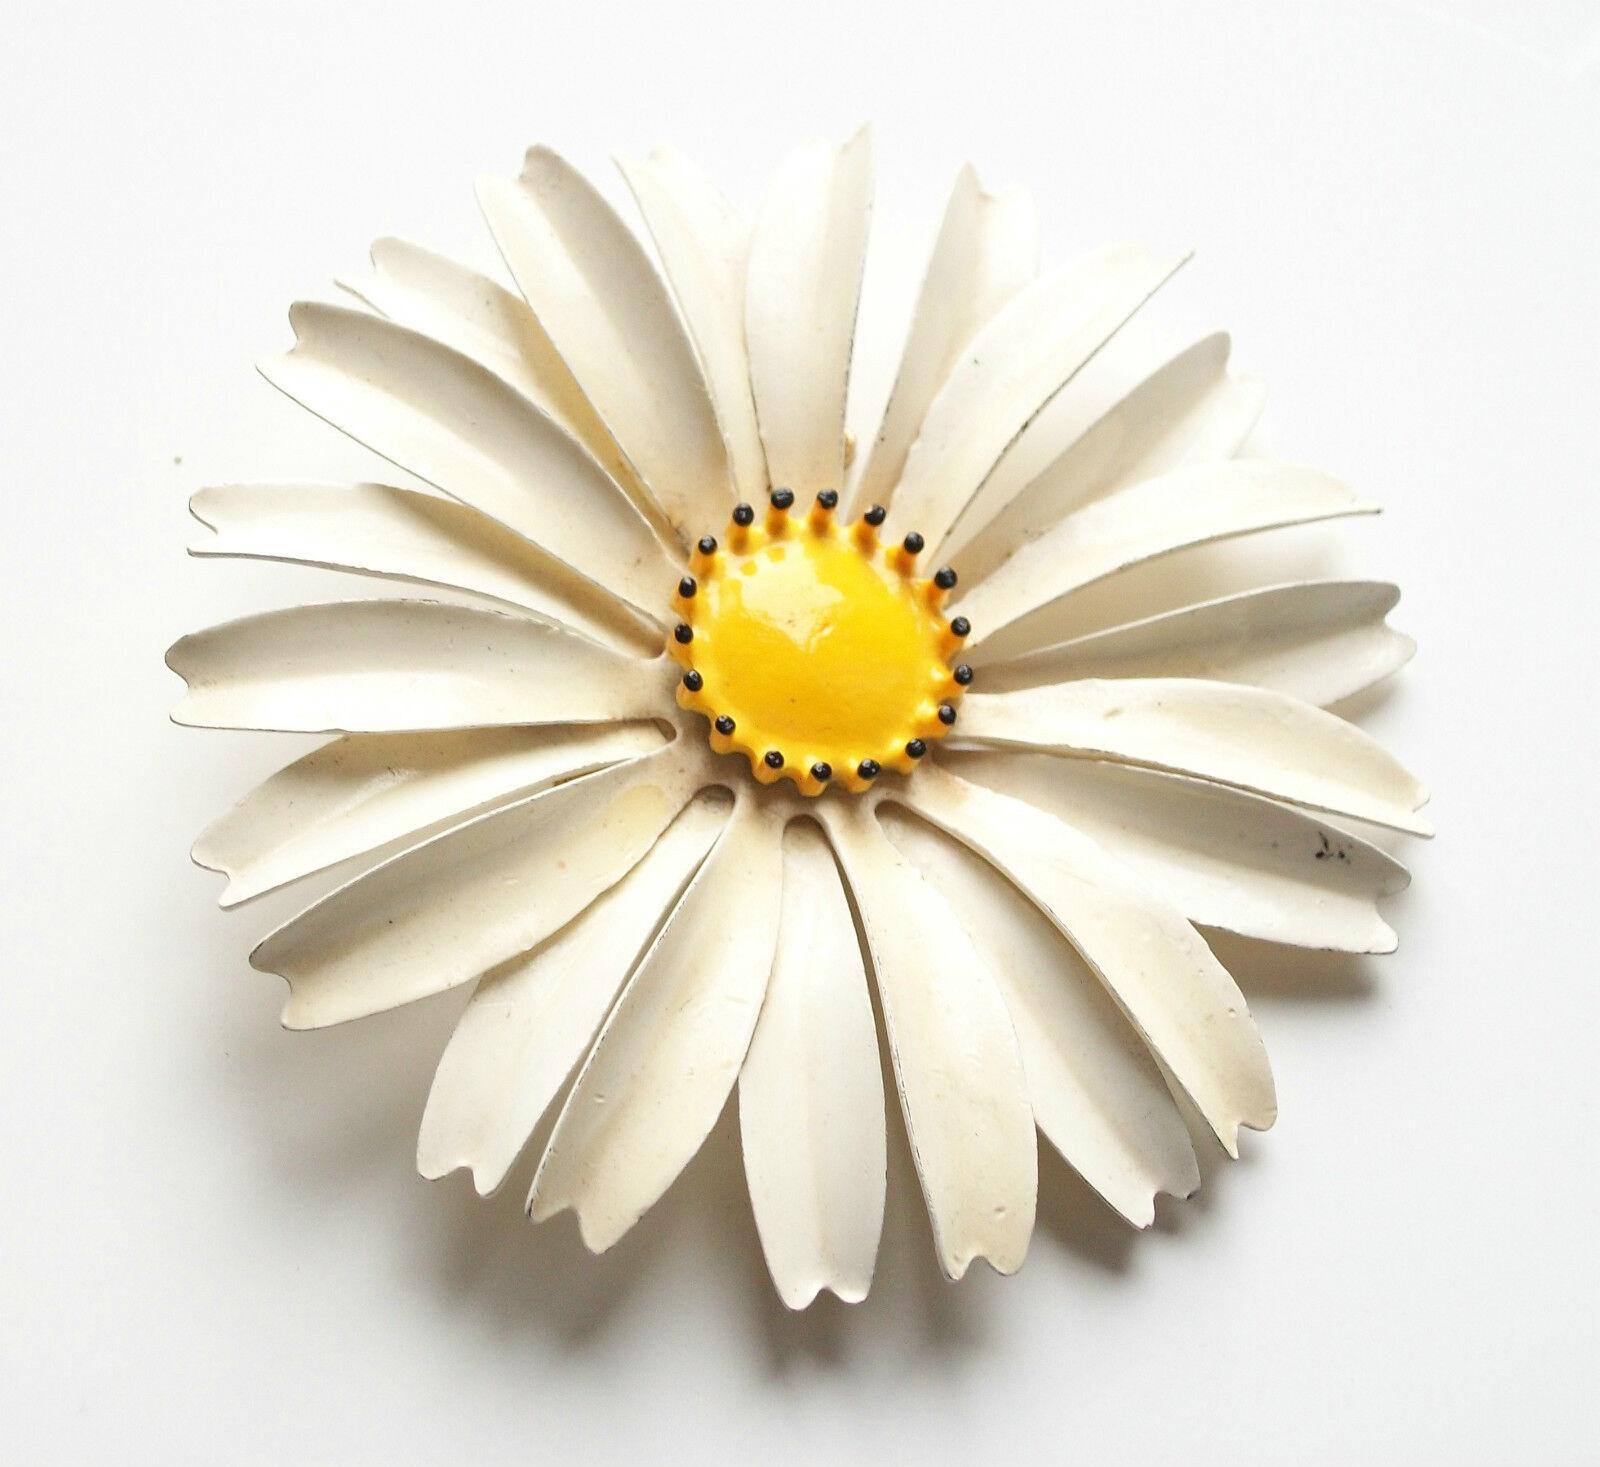 Vintage Enamel on Metal Daisy Brooch - Large Size - Unsigned - Circa 1960's For Sale 3